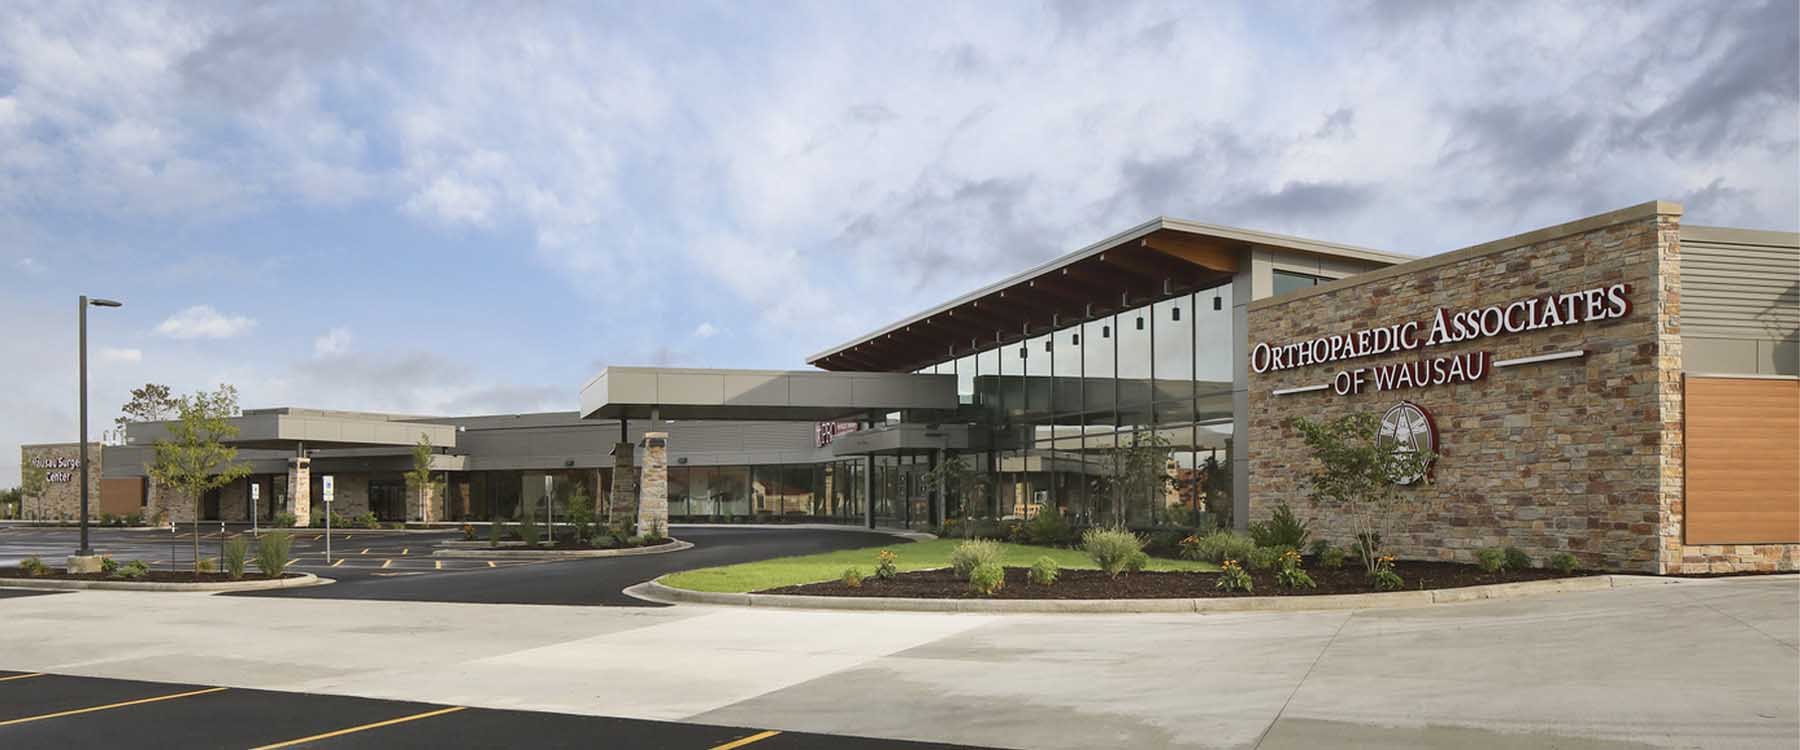 A new Ambulatory Surgery Center and Clinic: Orthopedic Associates of Wausau Orthopedic & Surgery Center Exterior with Natural Materials and Individual Entries